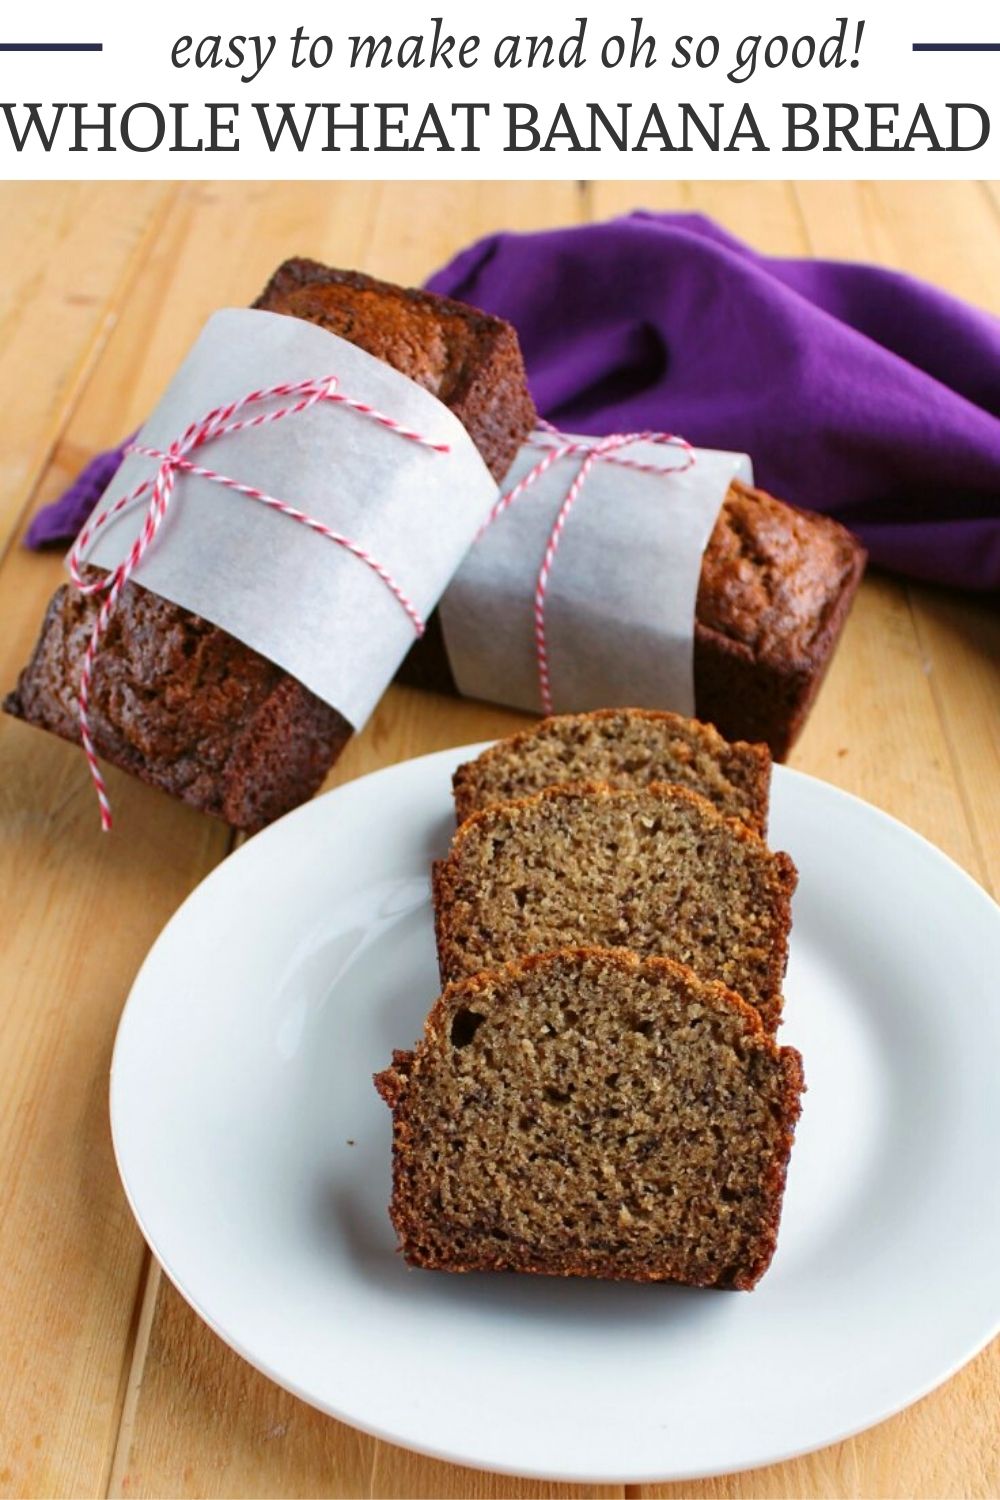 Whip up some delicious loaves of whole wheat banana bread flavored with brown sugar and the goodness of whole grains. This combination could quickly become your new favorite!